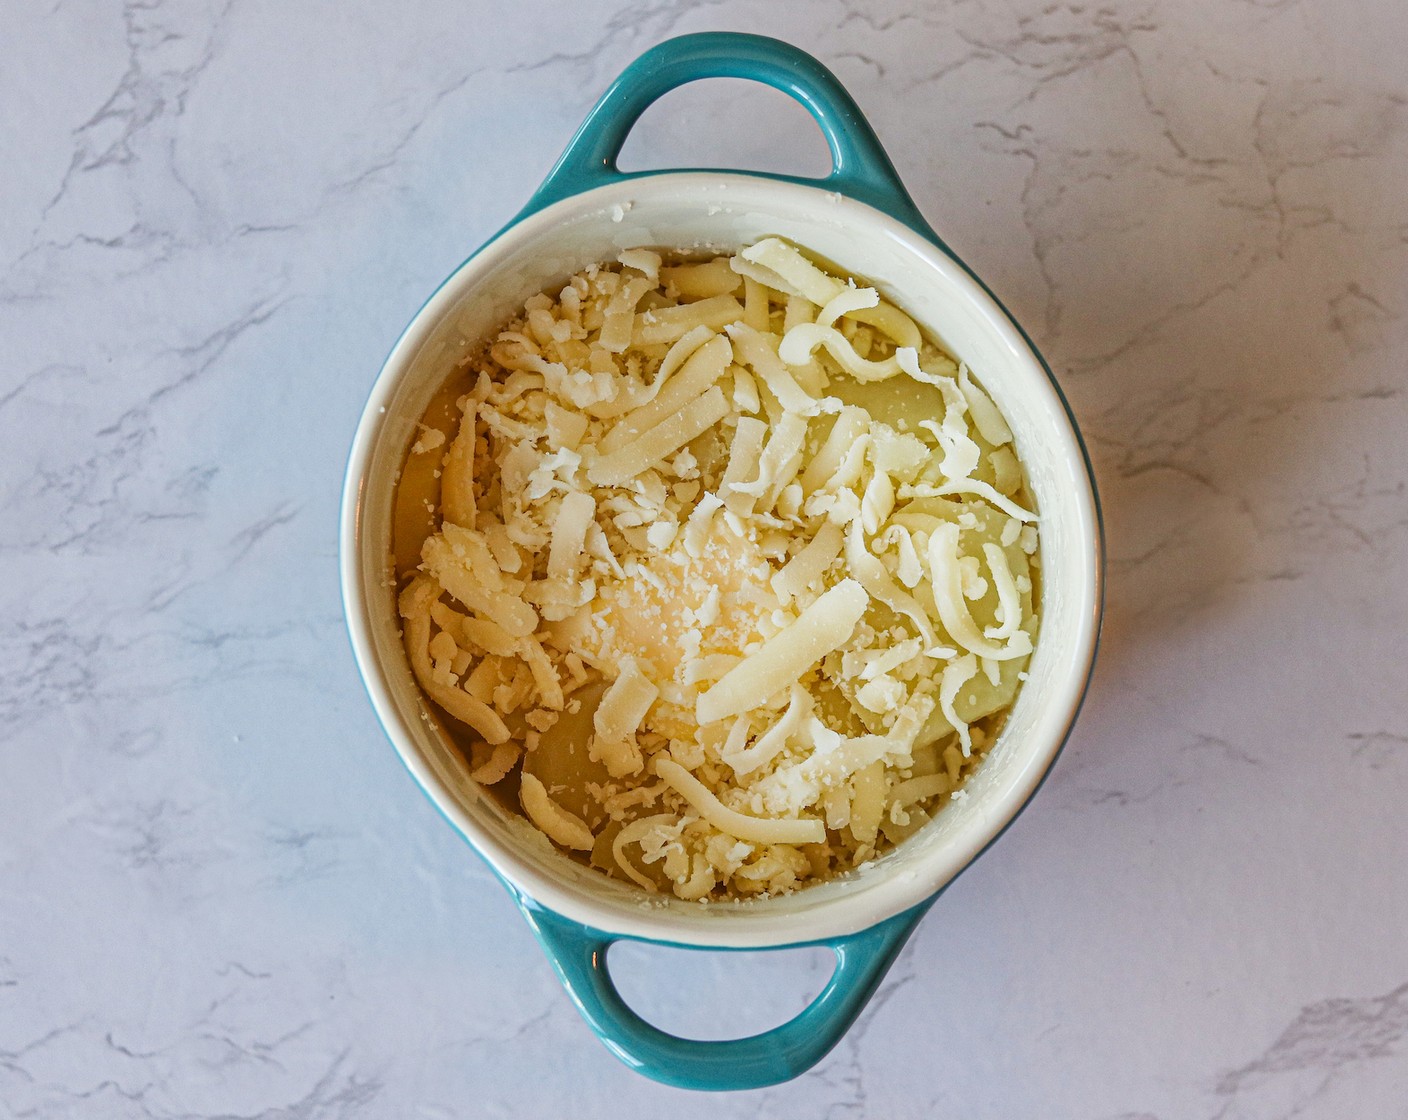 step 6 Top each casserole dish with 1 Tbsp of Butter (1/4 cup) and 2 Tbsp of Shredded Mozzarella Cheese (1/2 cup).